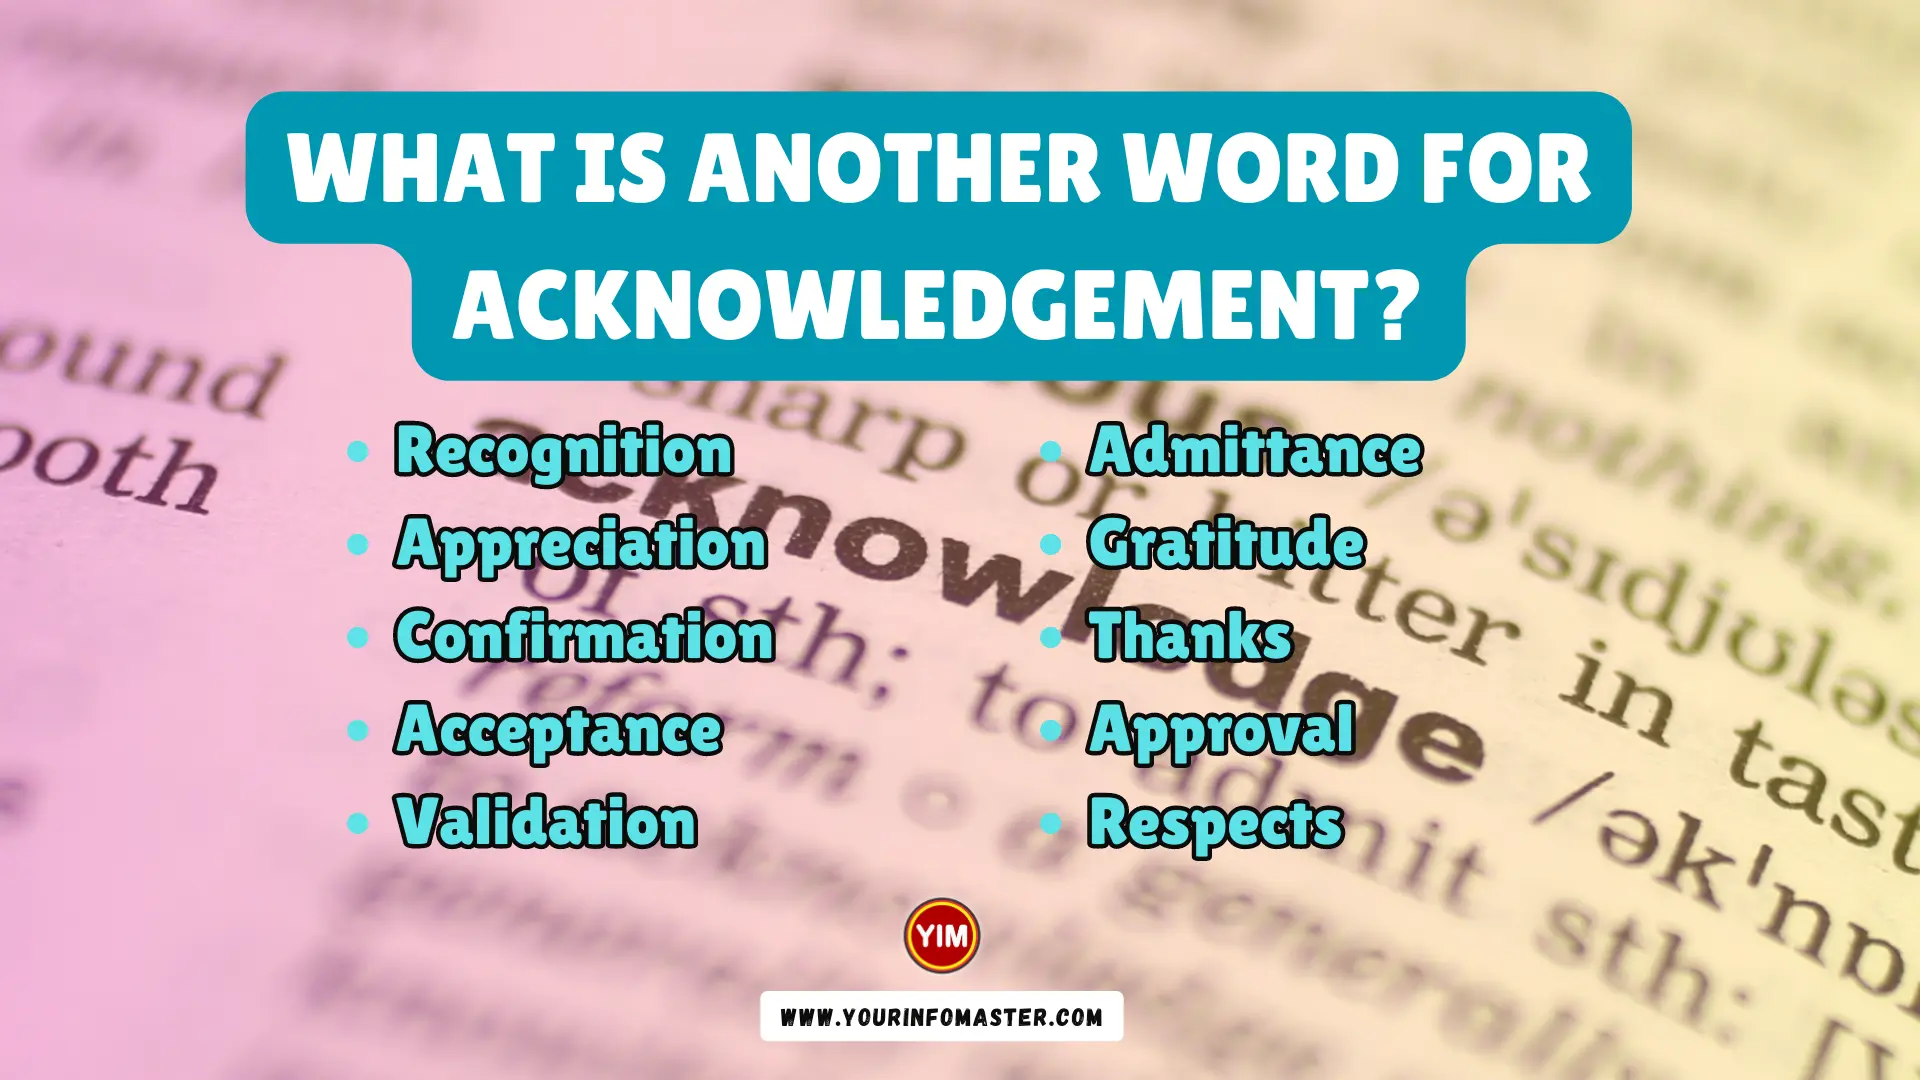 What is another word for Acknowledgement